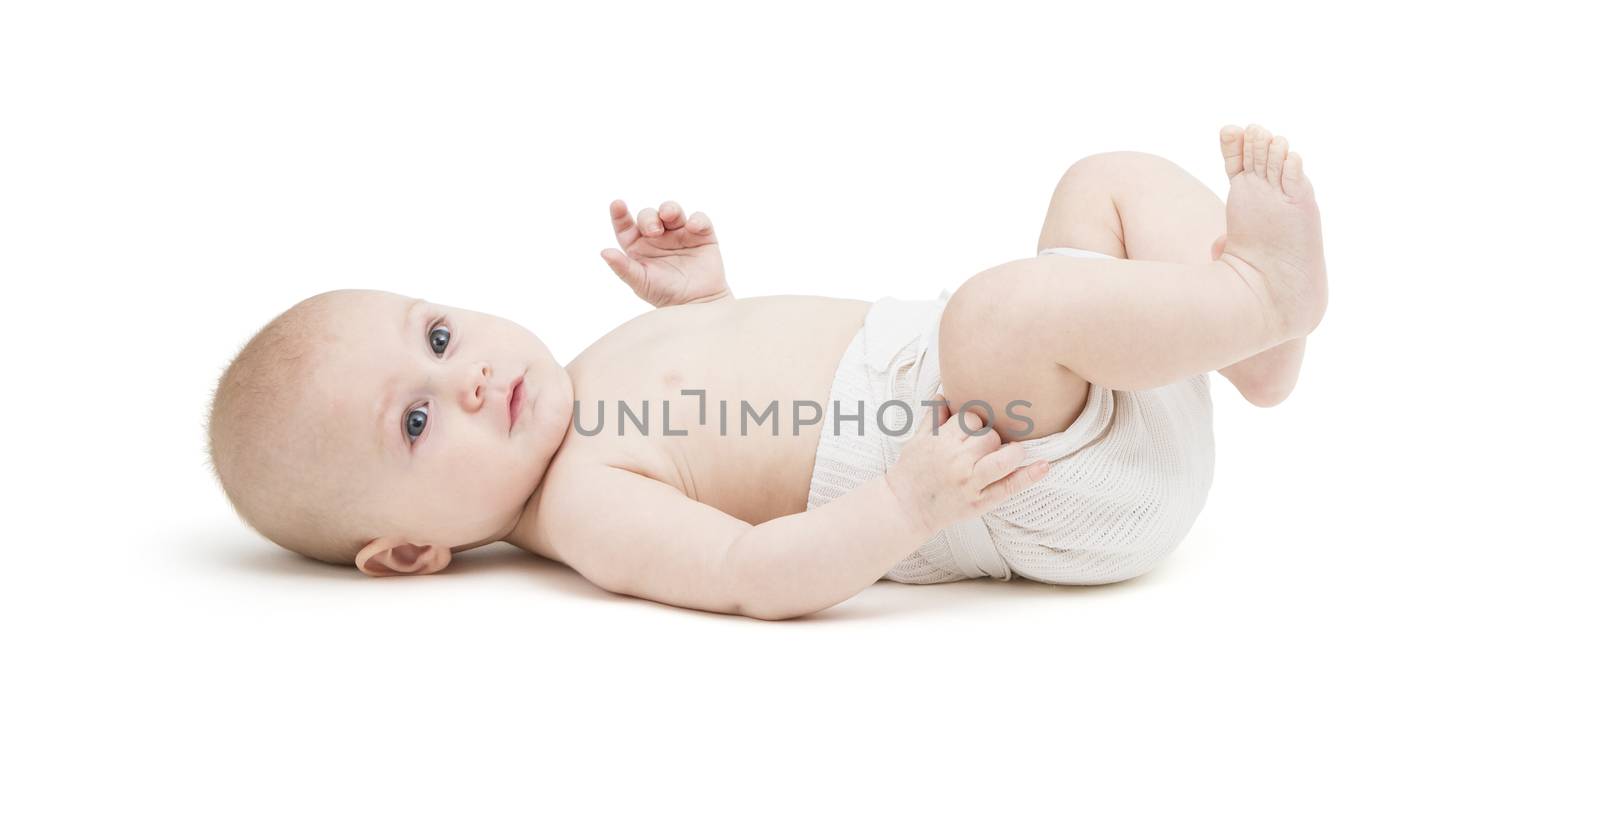 toddler in diaper lying on back. isolated on white background